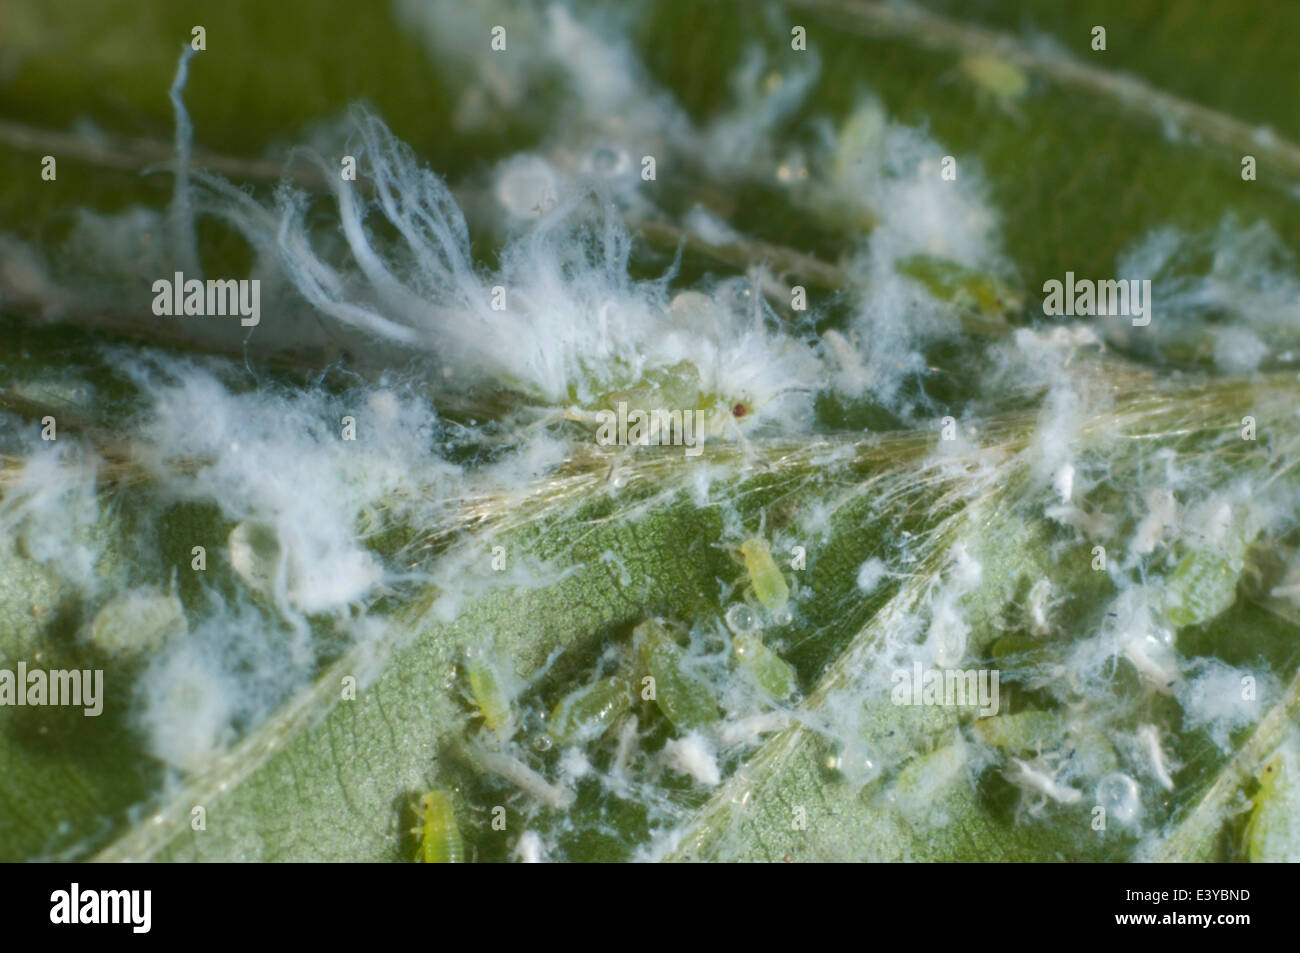 Photomicrograph of a woolly beech aphid, Phyllaphis fagi, colony on the underside of young beech hedge leaves Stock Photo